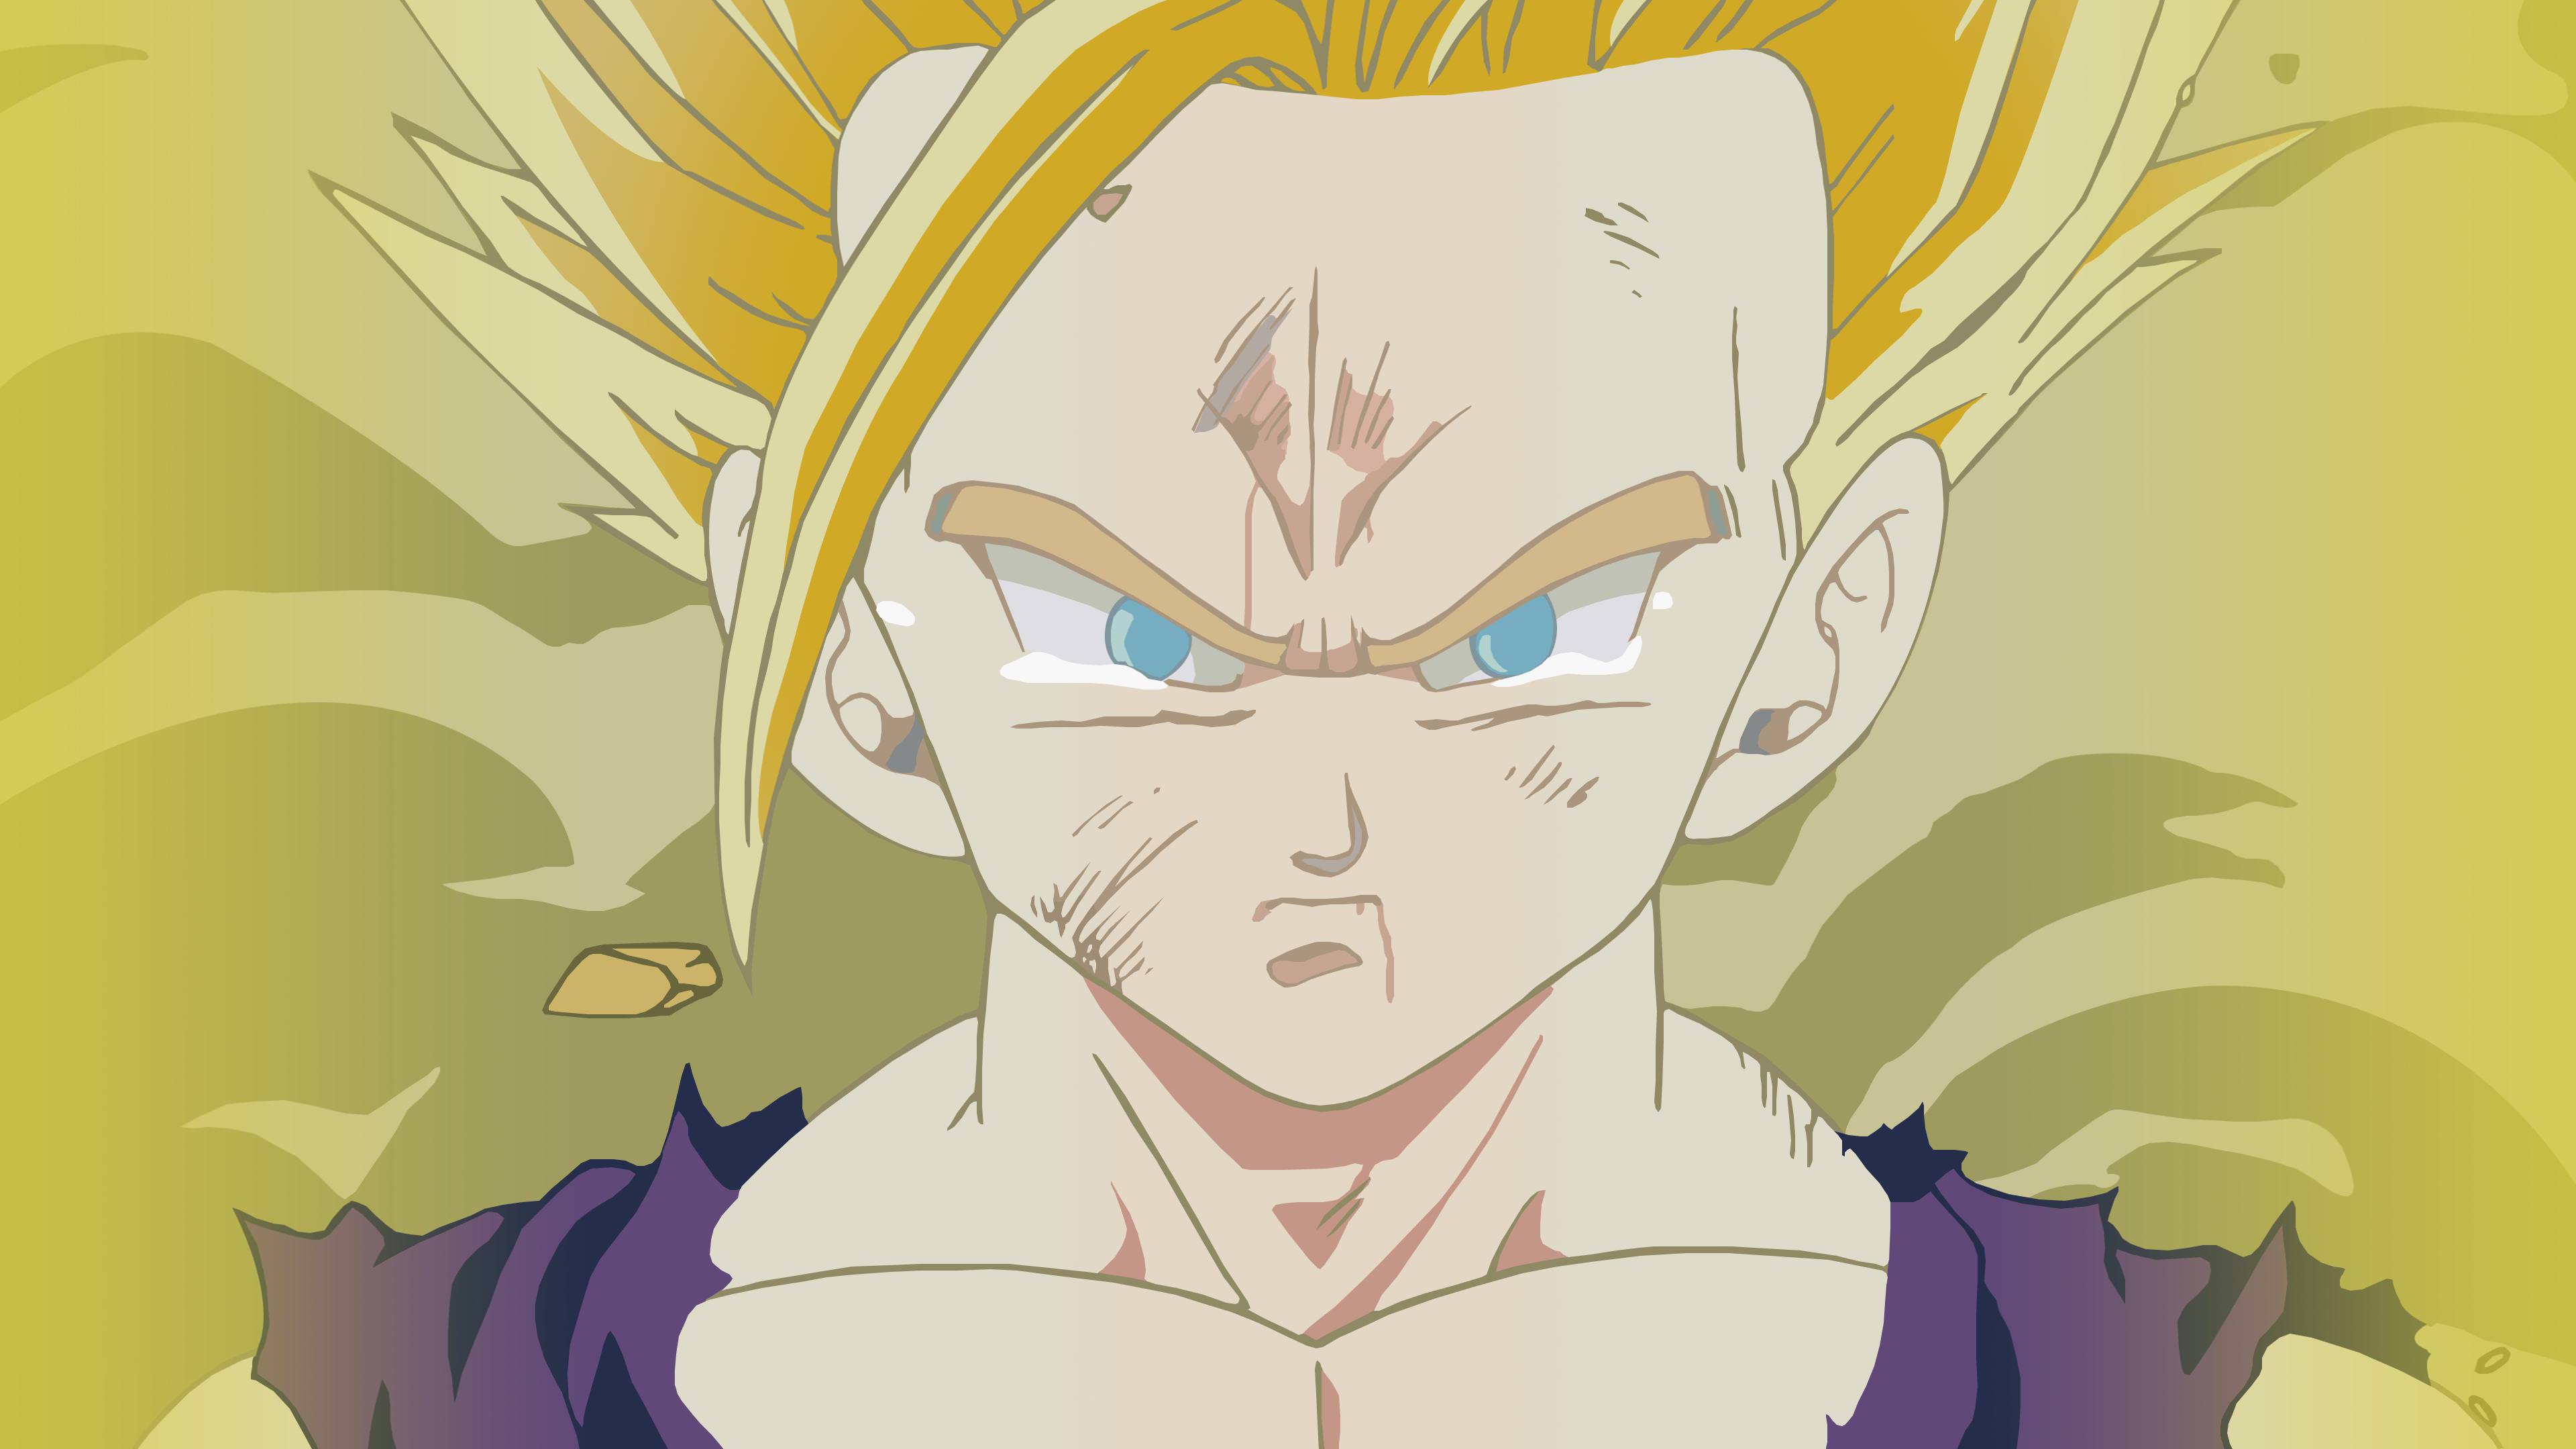 Gohan 4K wallpapers for your desktop or mobile screen free and easy to down...